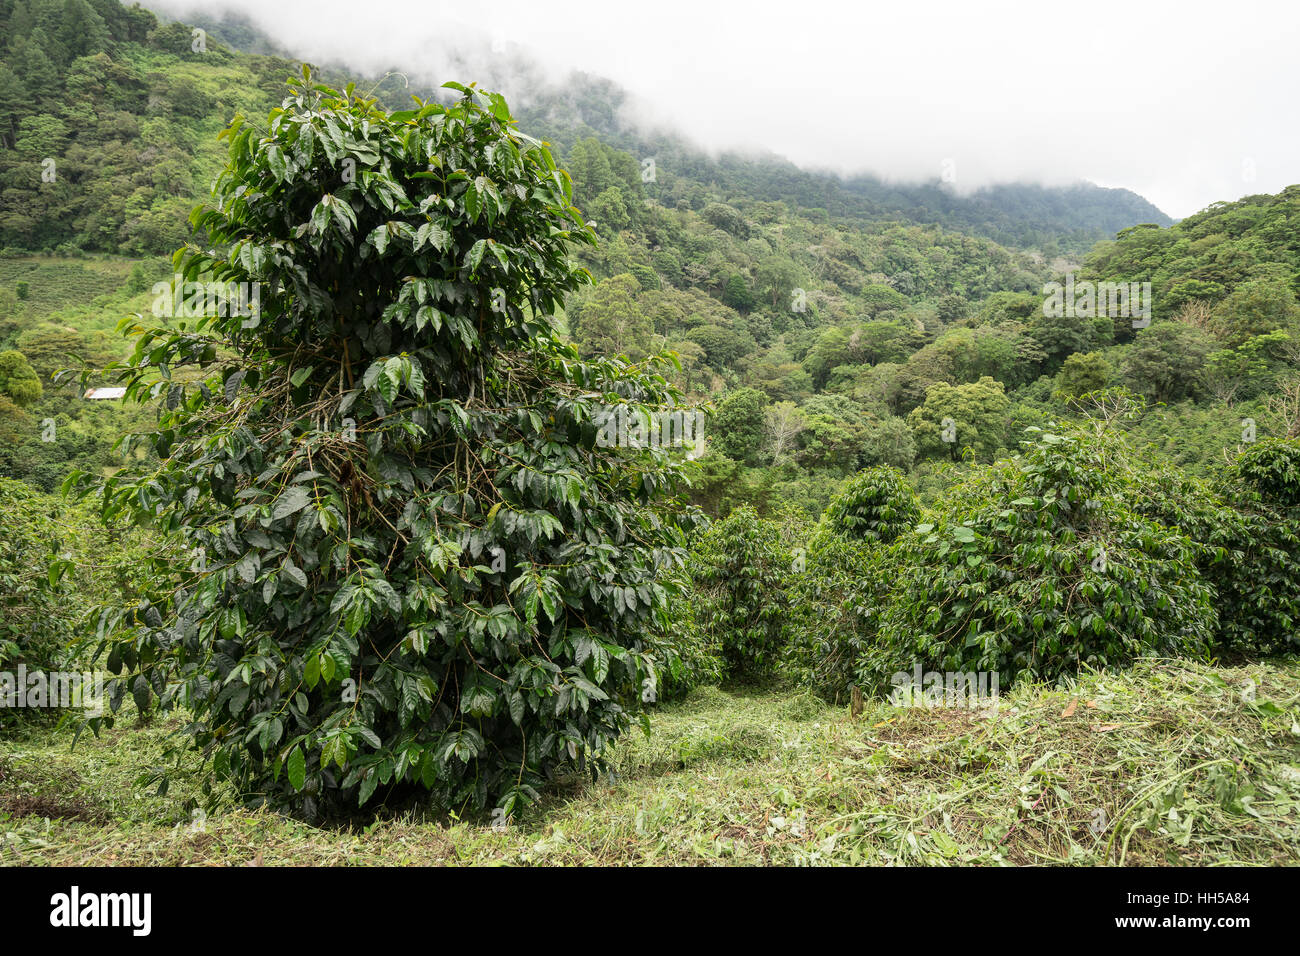 Coffee bush and tropical vegetation in the highlands of Panama Stock Photo